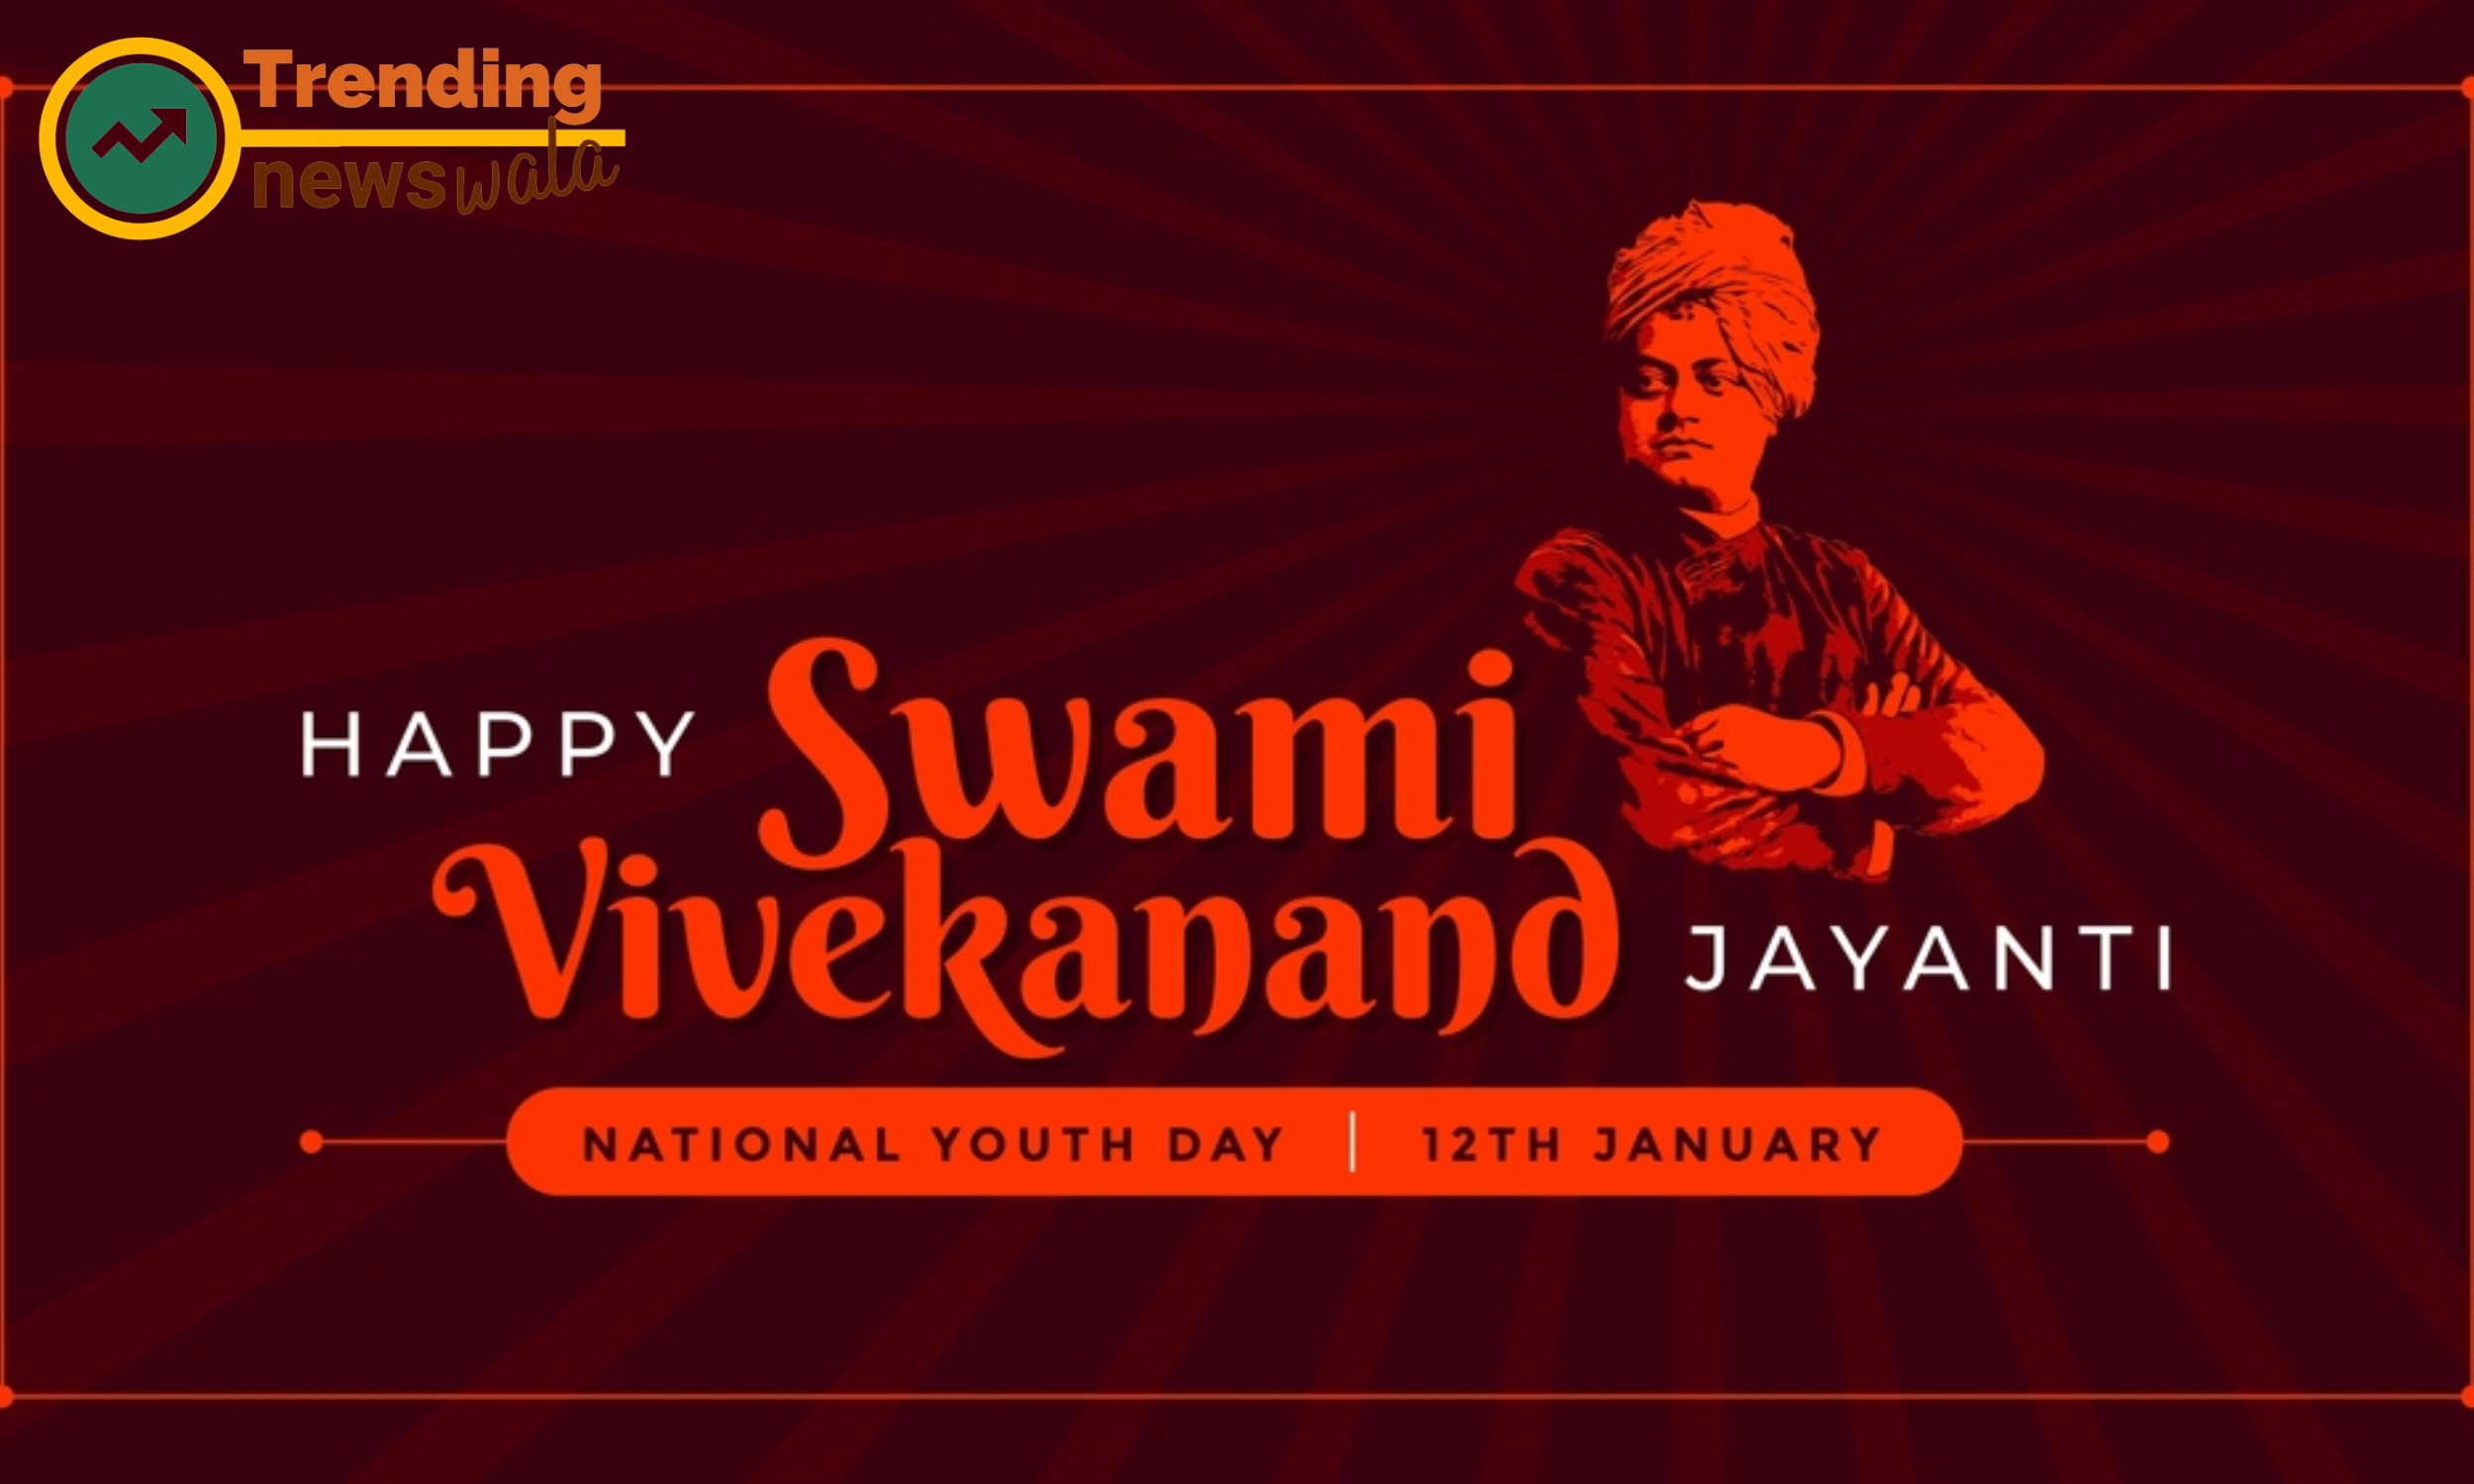 Central to Swami Vivekananda's teachings was the concept of a universal religion